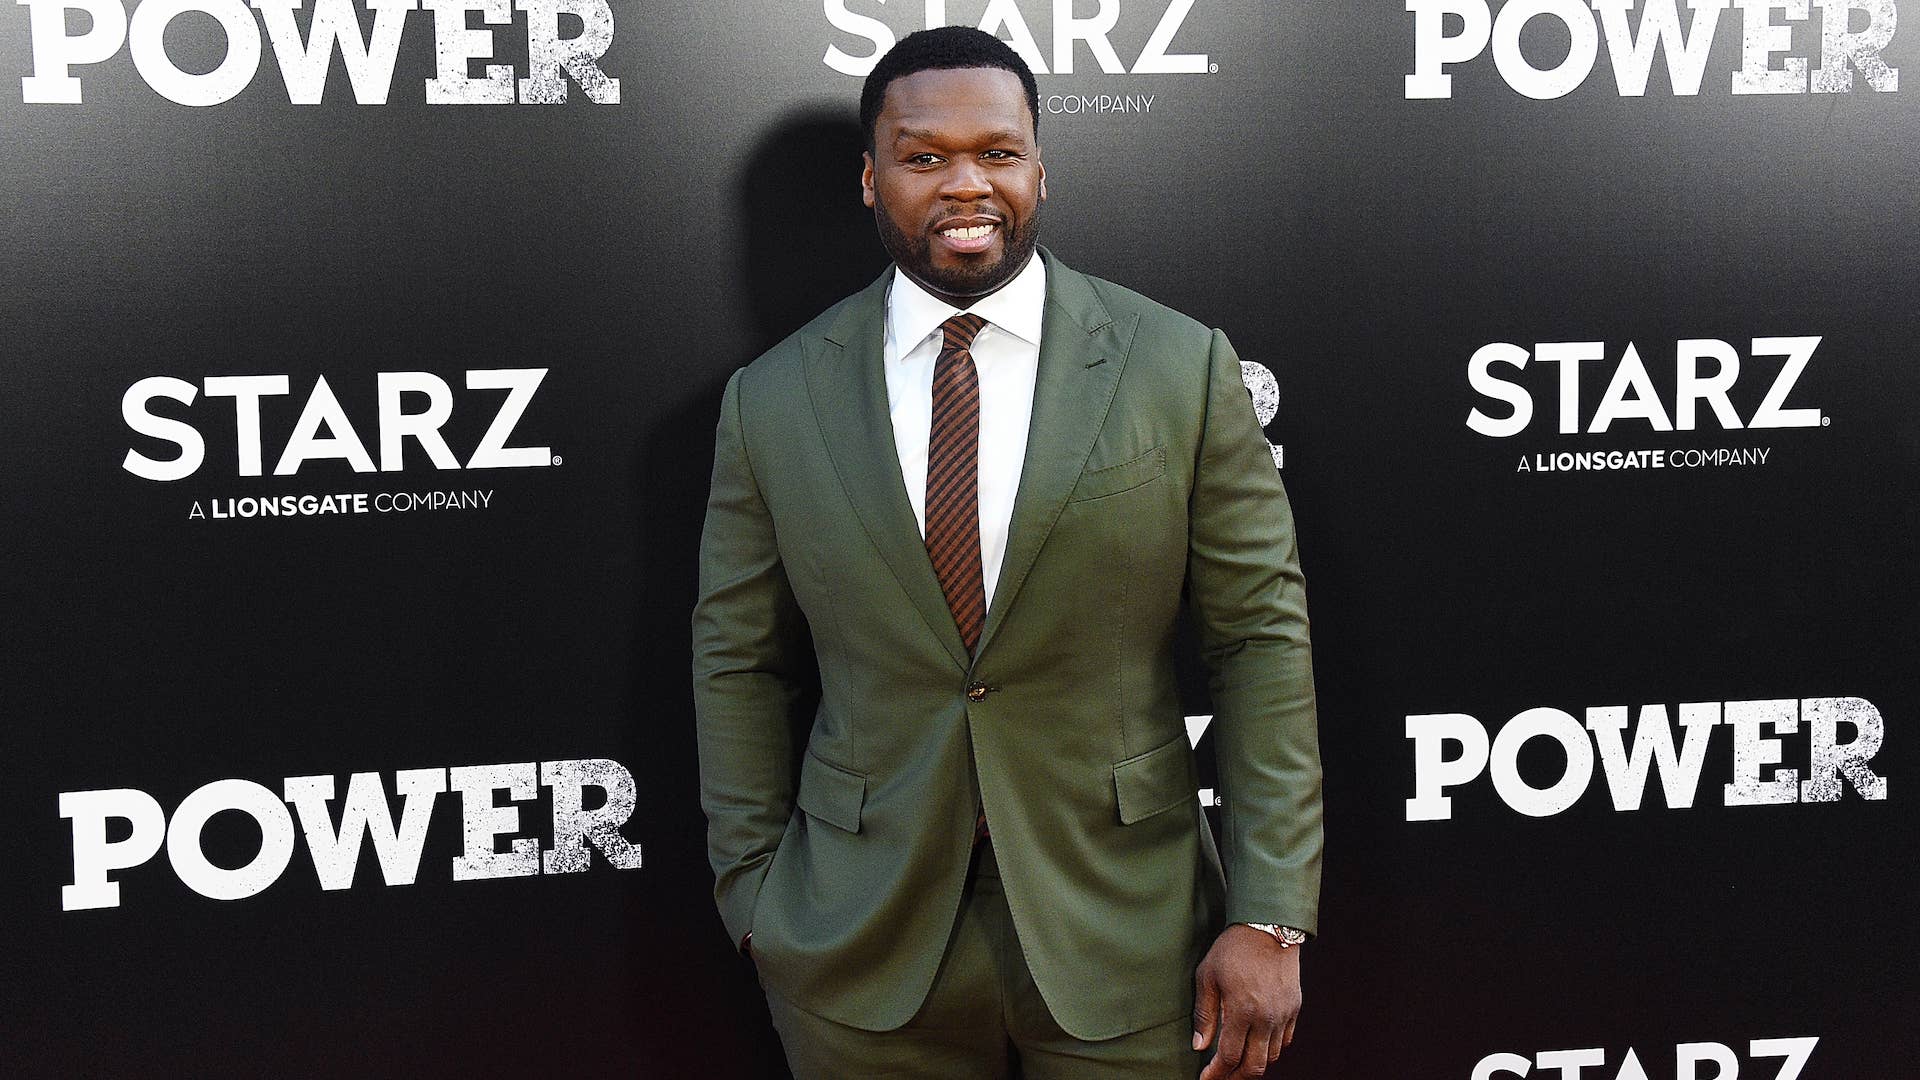 Photograph of 50 Cent at a Starz event